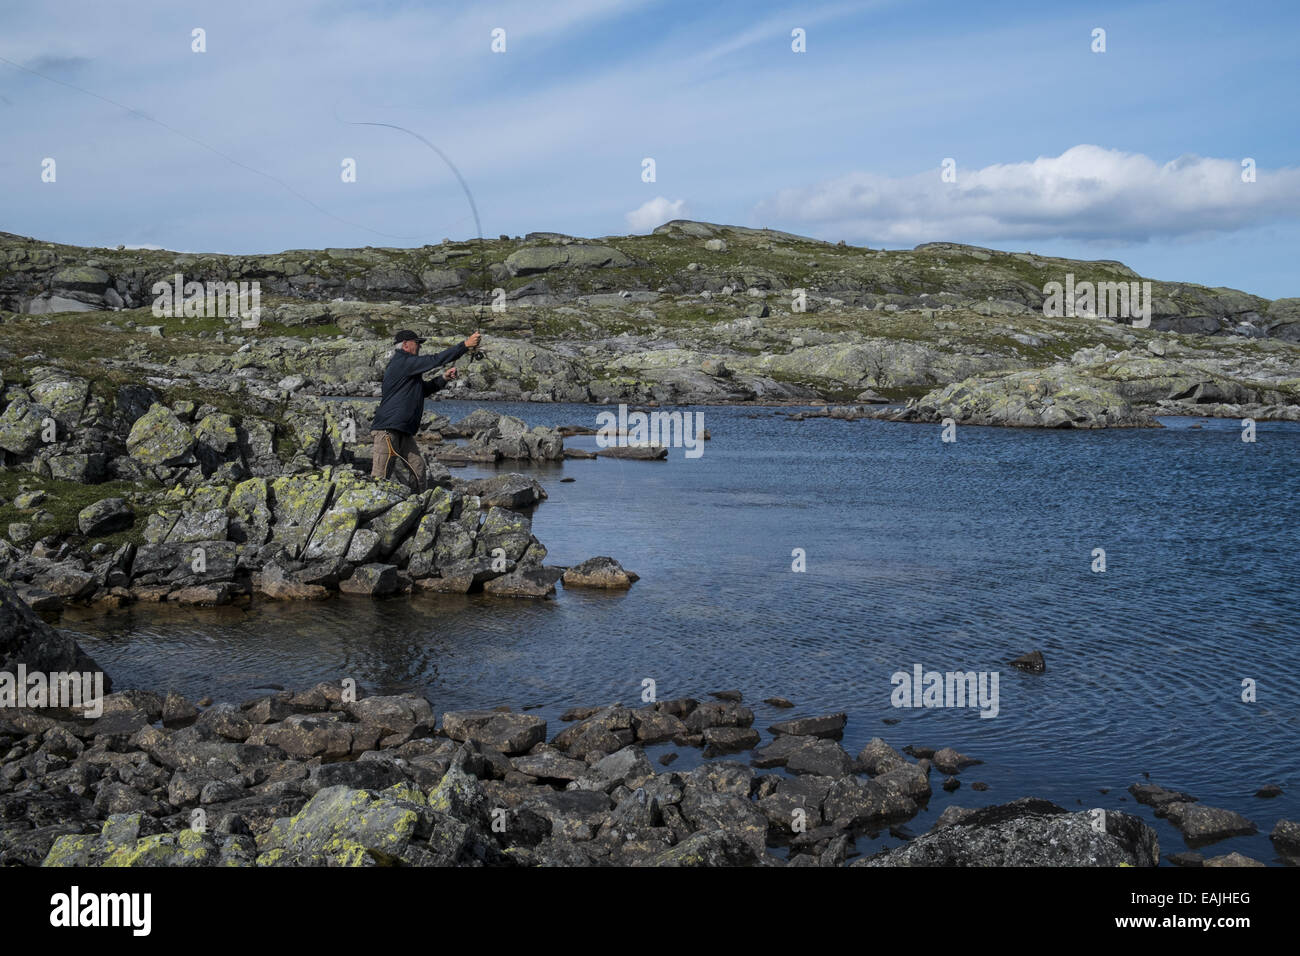 Trout fly fishing in a lake, Hardangervidda National park Norway Stock Photo